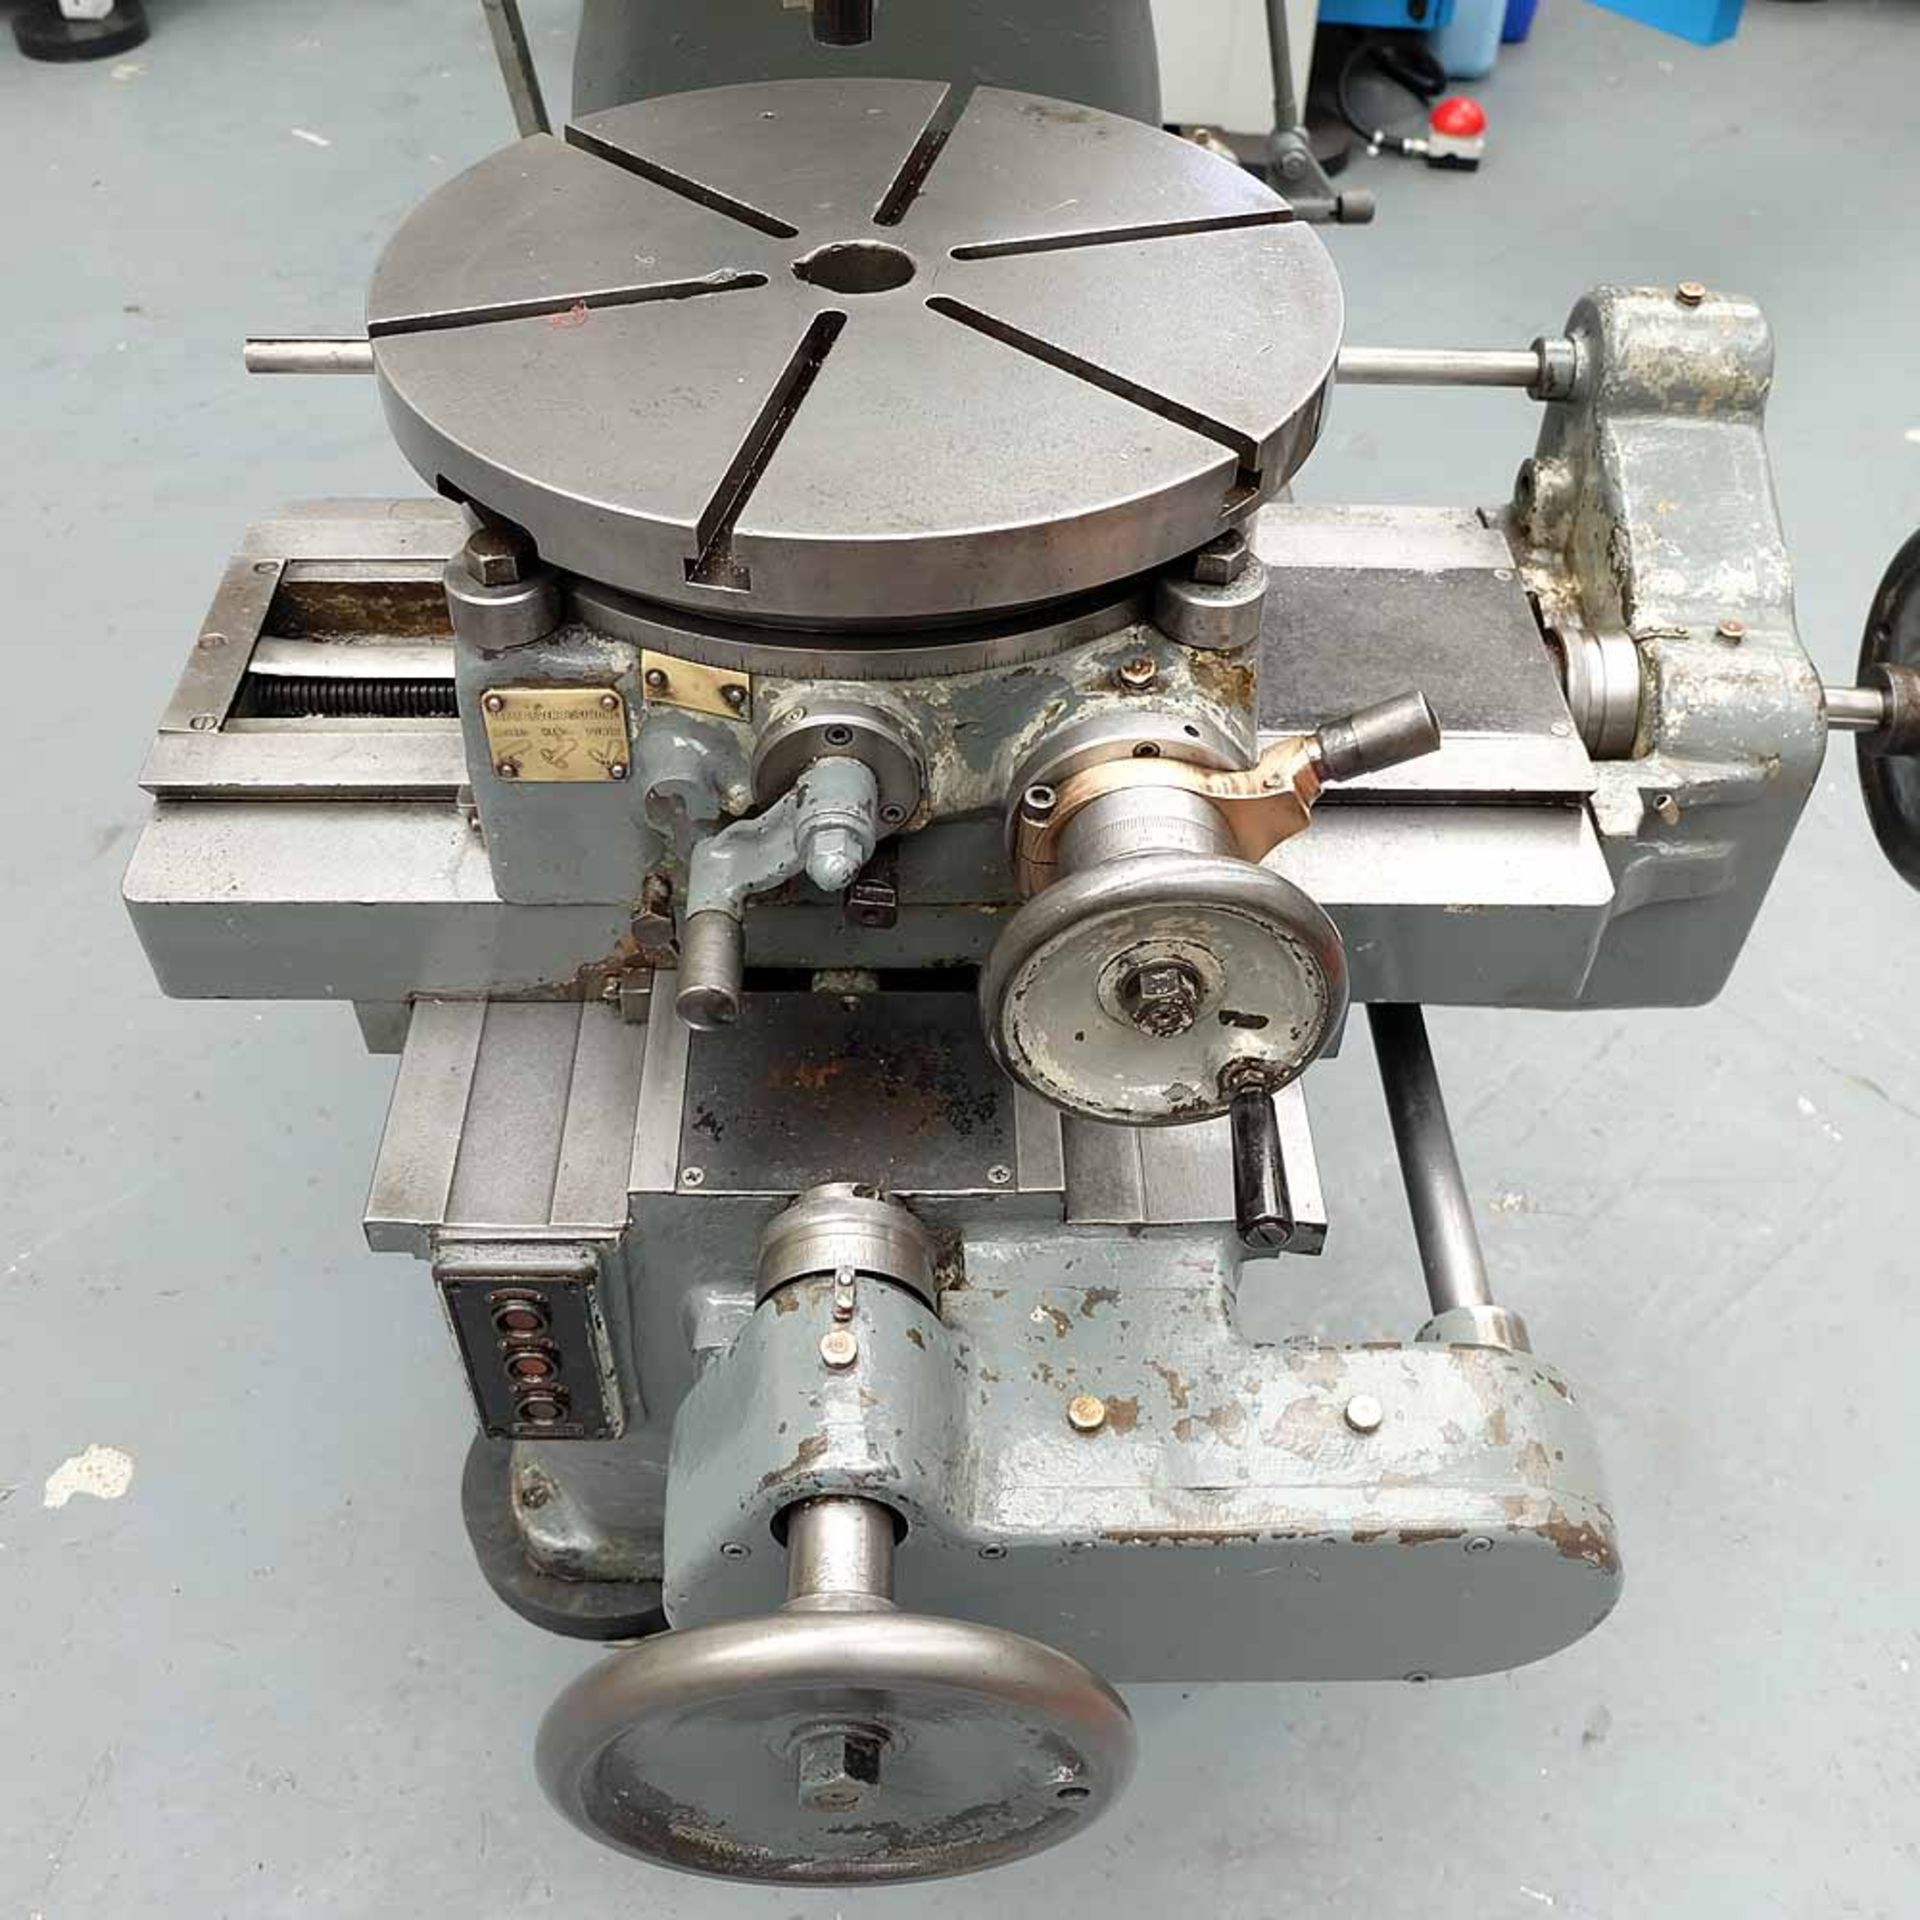 Burdett 6" Slotting Machine with Indexing Rotating Table. Table Size: 18" Diameter. - Image 6 of 13